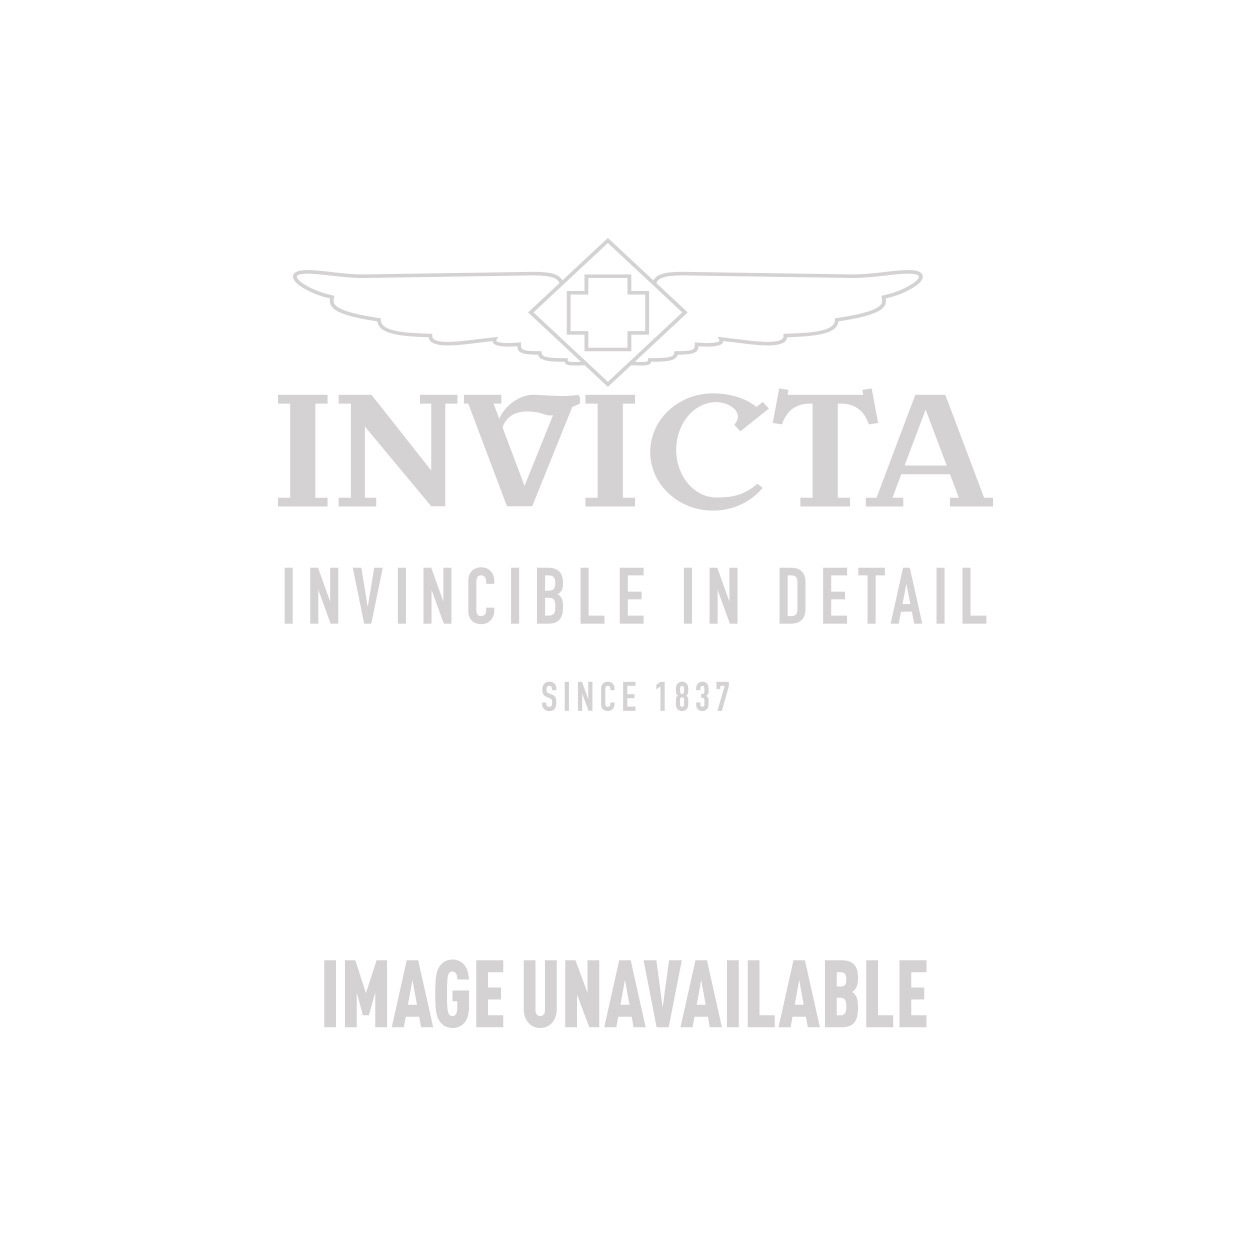 Invicta S1 Rally Automatic Watch - Rose Gold case with Brown tone Silicone band - Model 12791